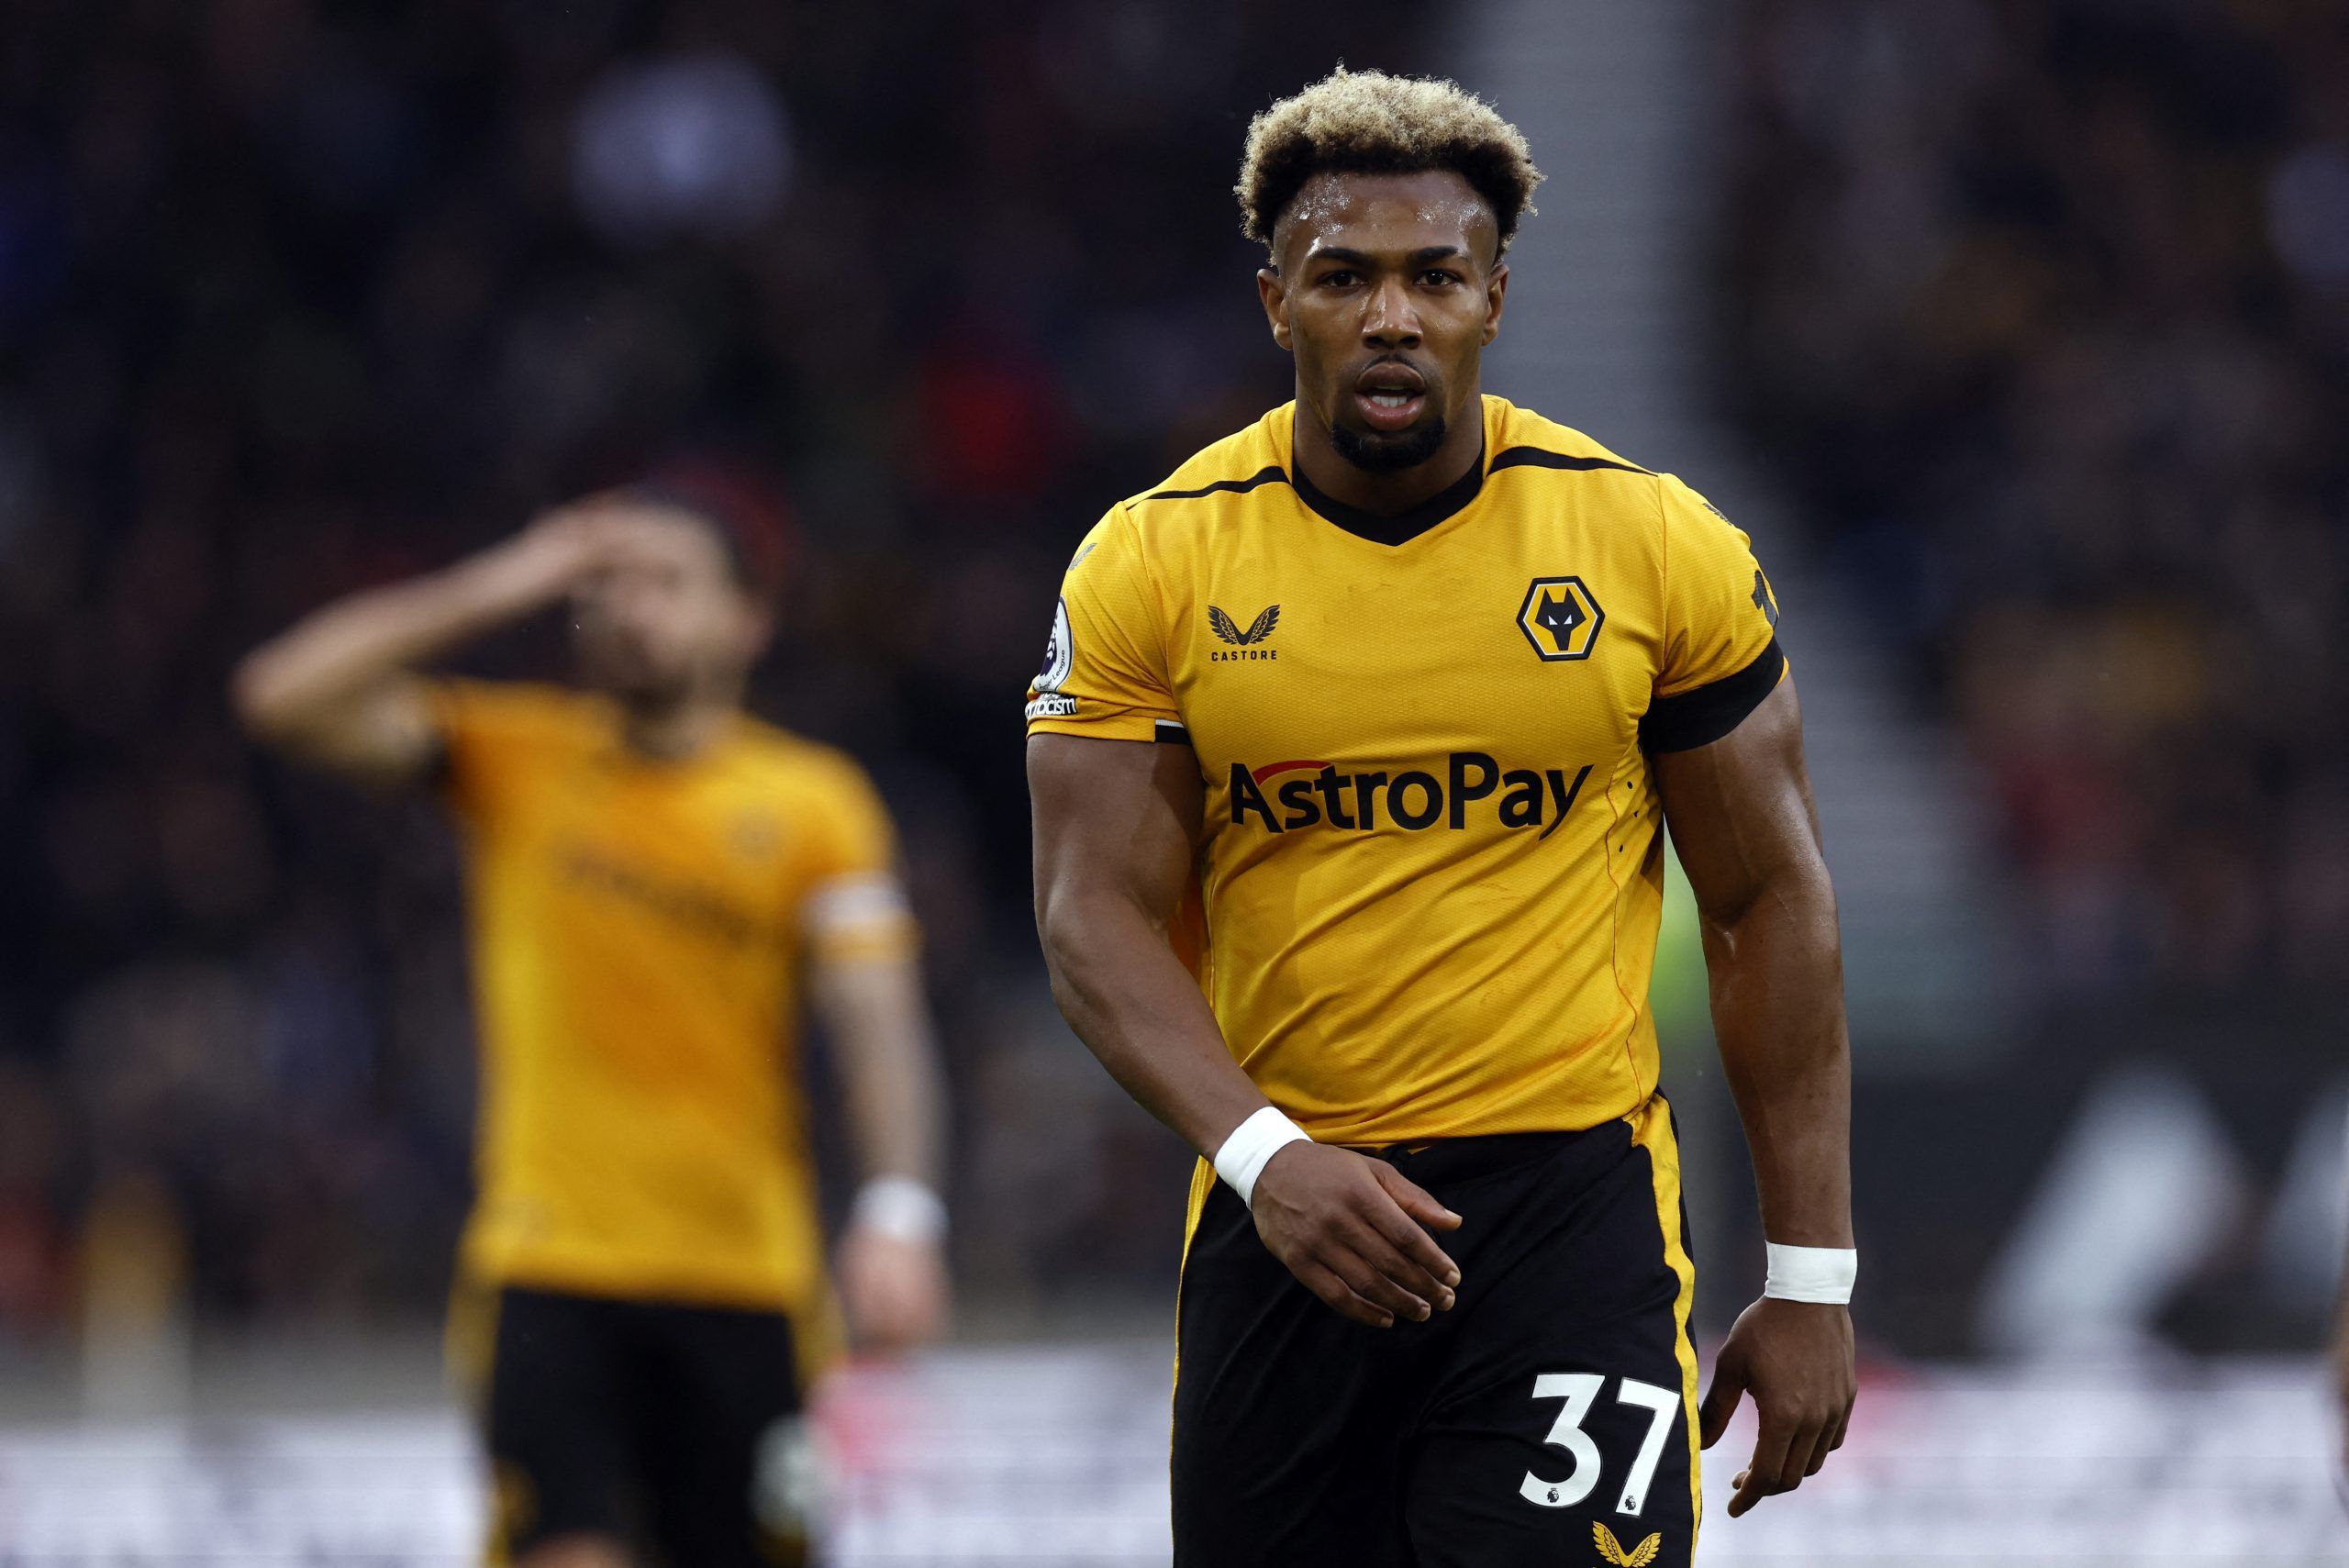 Soccer Football - Premier League - Wolverhampton Wanderers v Manchester United - Molineux Stadium, Wolverhampton, Britain - December 31, 2022 Wolverhampton Wanderers' Adama Traore looks dejected Action Images via Reuters/Andrew Couldridge EDITORIAL USE ONLY. No use with unauthorized audio, video, data, fixture lists, club/league logos or 'live' services. Online in-match use limited to 75 images, no video emulation. No use in betting, games or single club /league/player publications.  Please cont